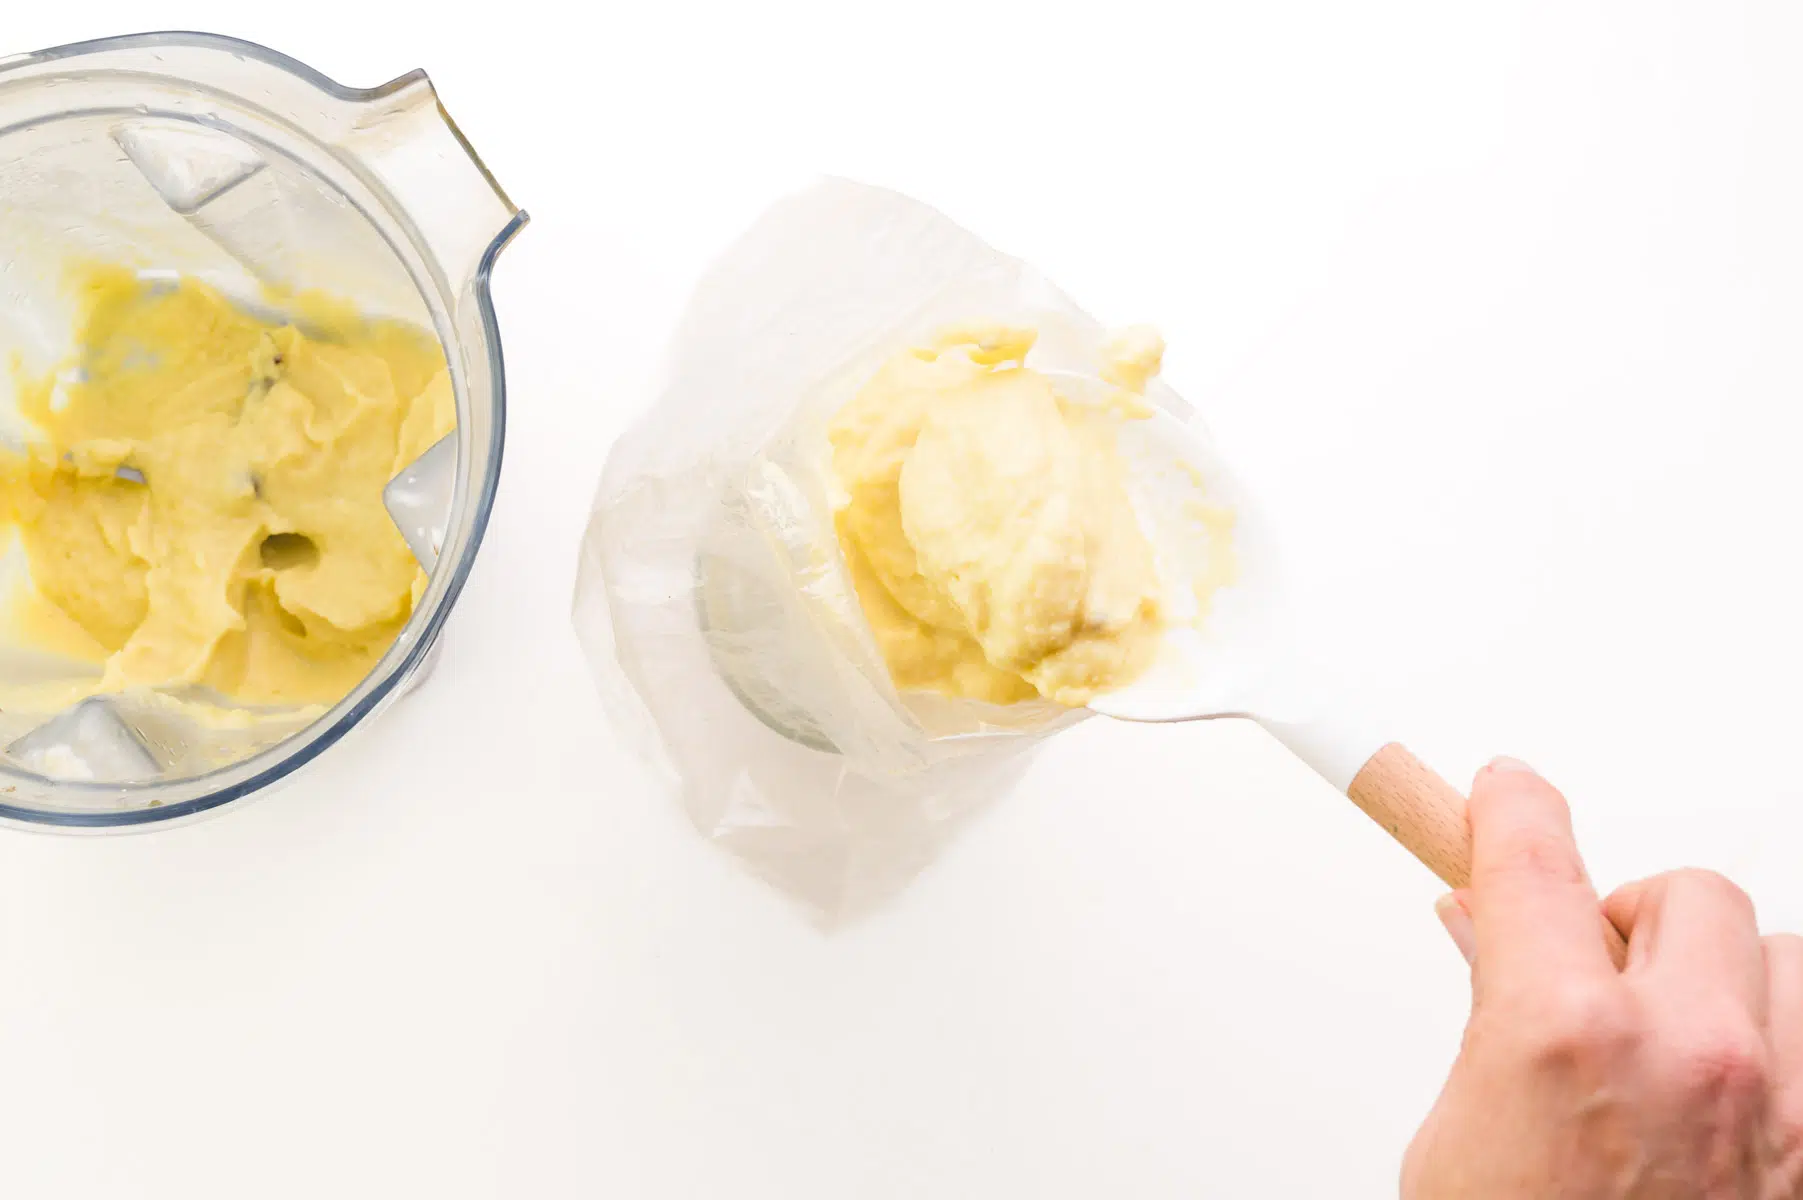 A hand holds a spatula, transferring dole whip from a blender to a piping bag.